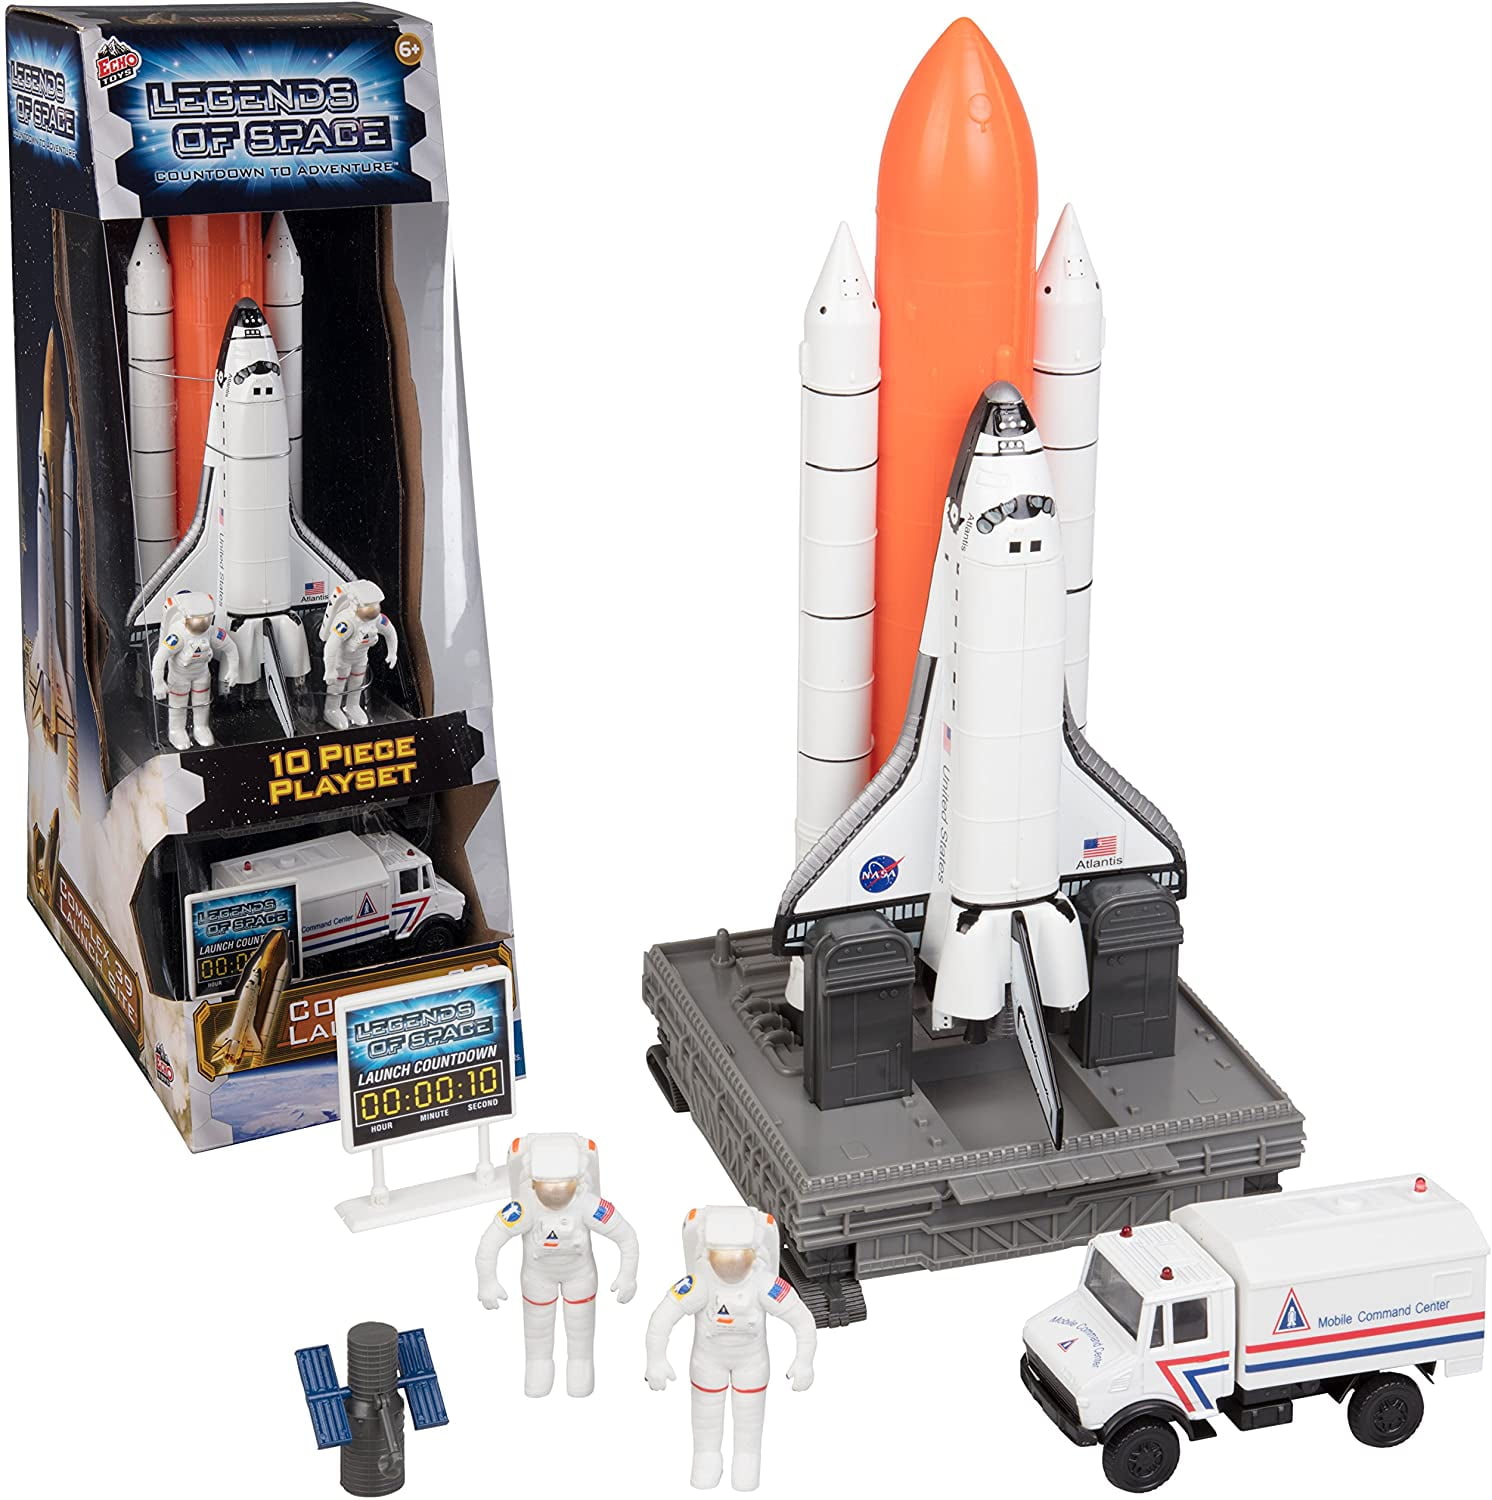 1 Set of Rocket Shuttle Air Powered Launcher Toy Lawn Jump Rocket Launcher Toy 